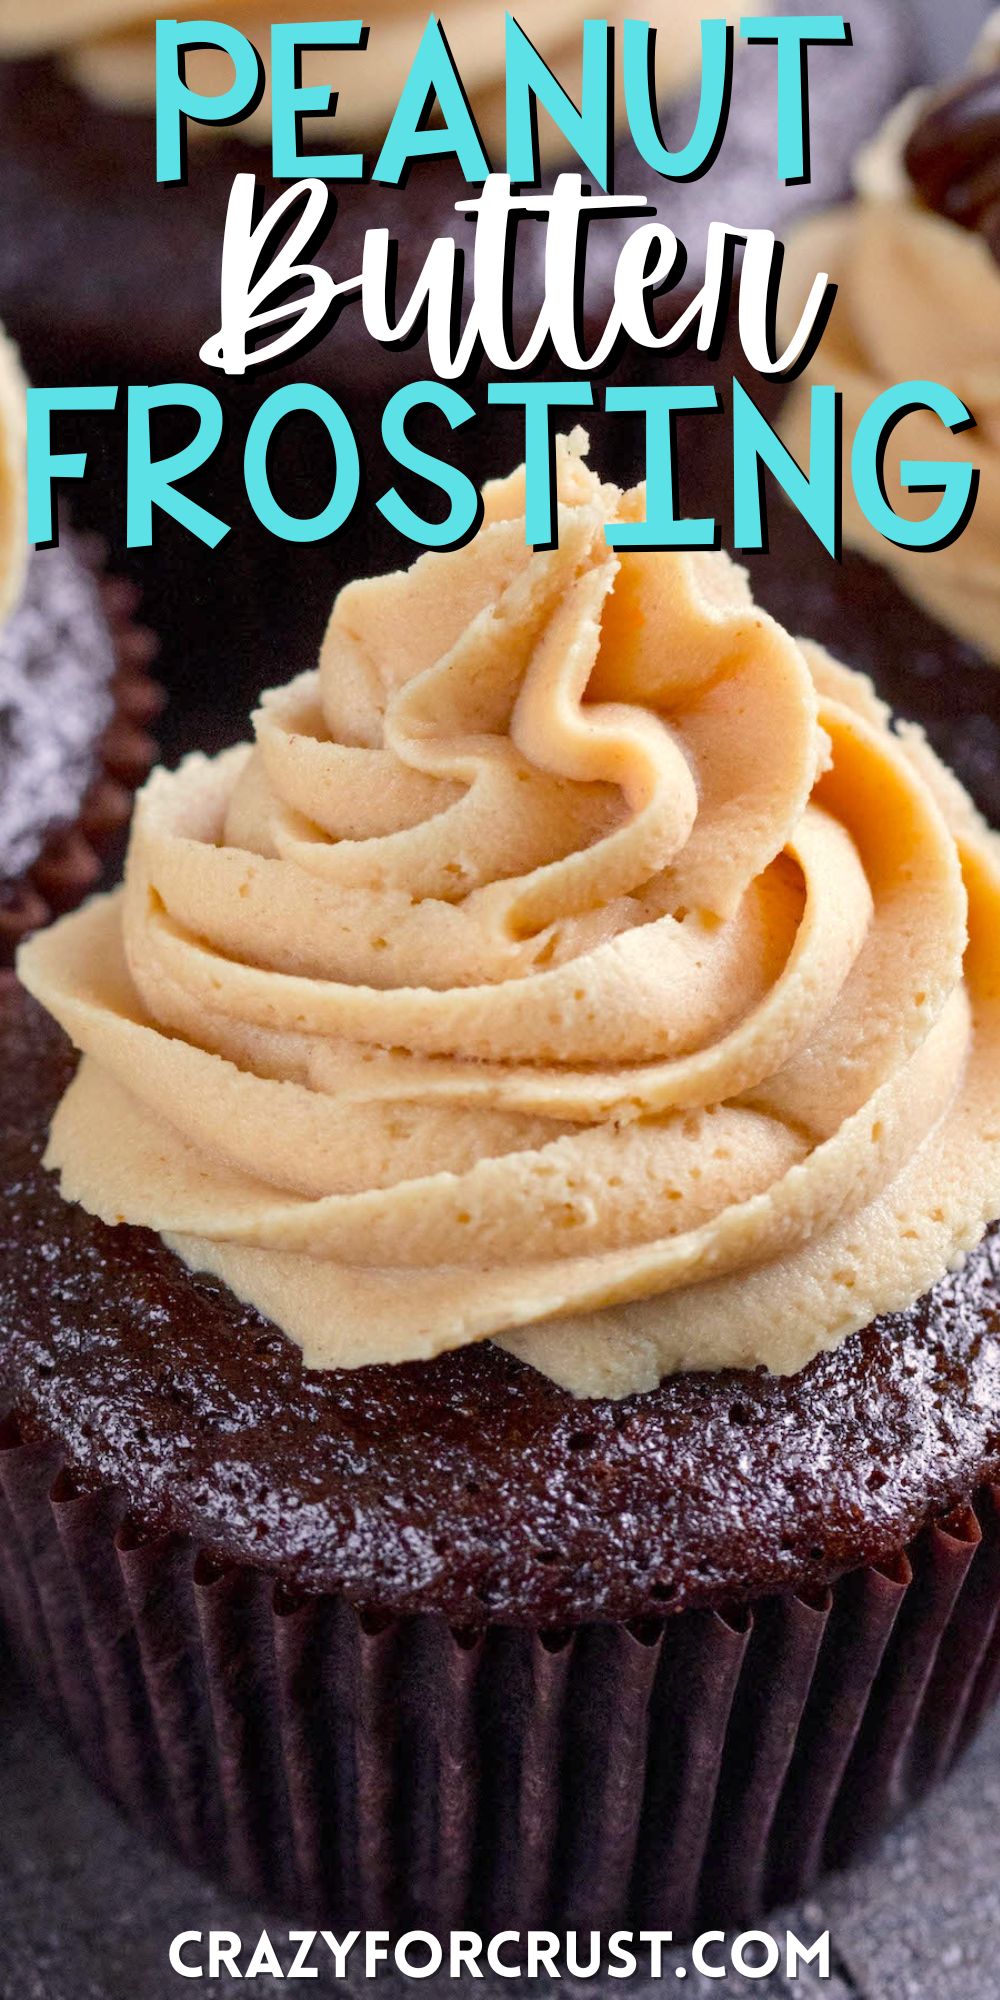 chocolate cupcakes with peanut butter frosting on top with words on the image.